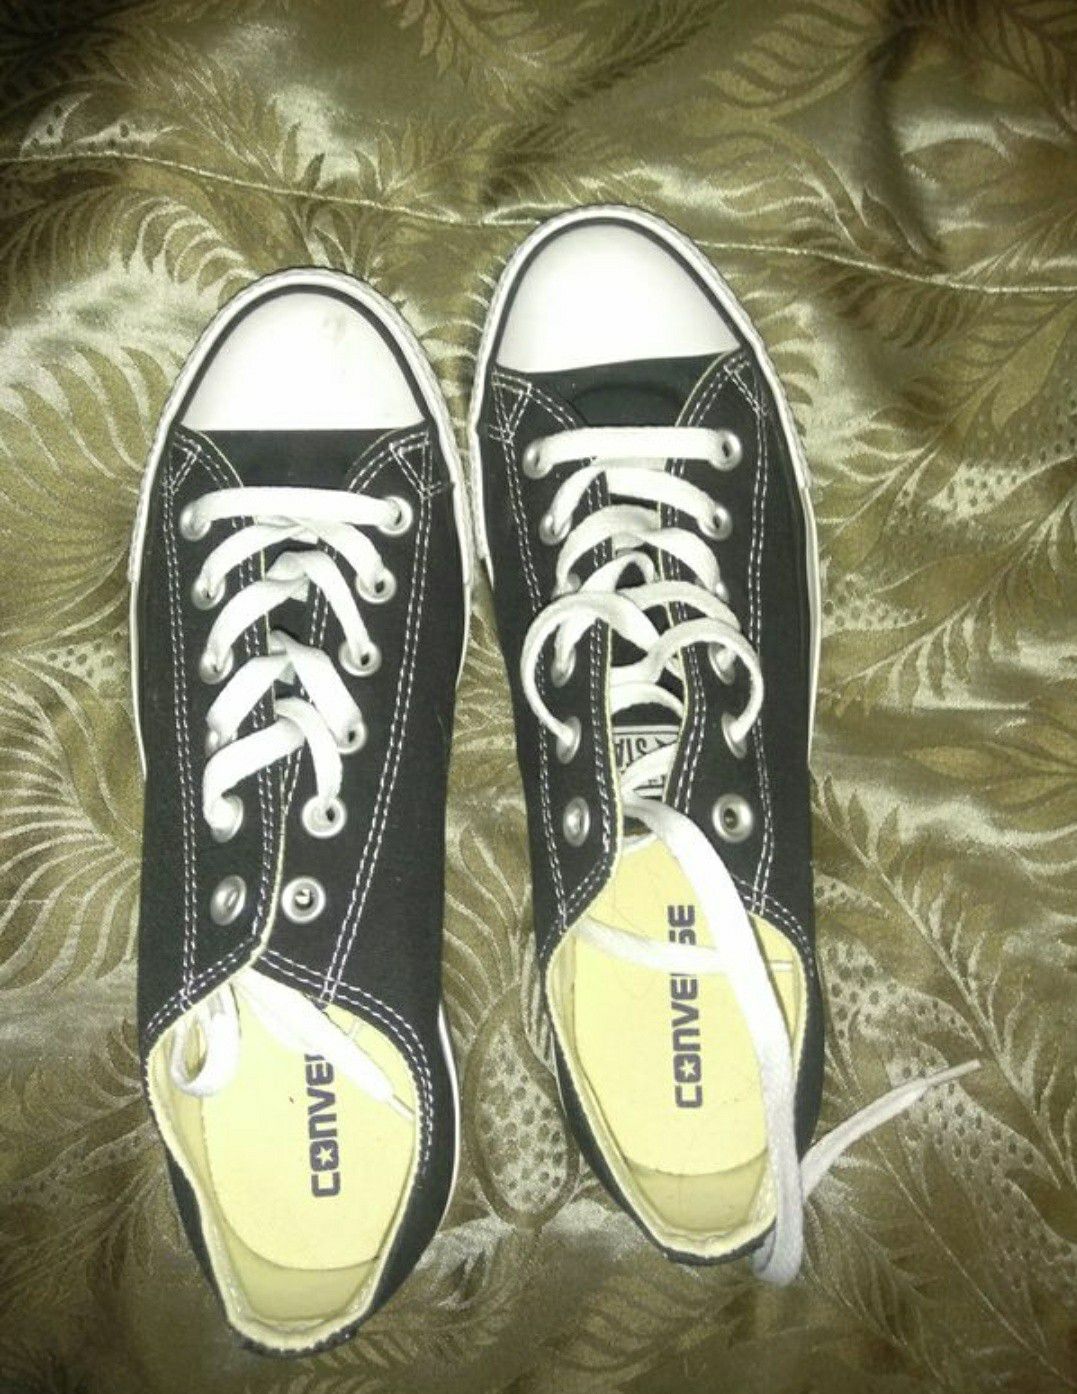 Converse shoes price is firm! No trades!